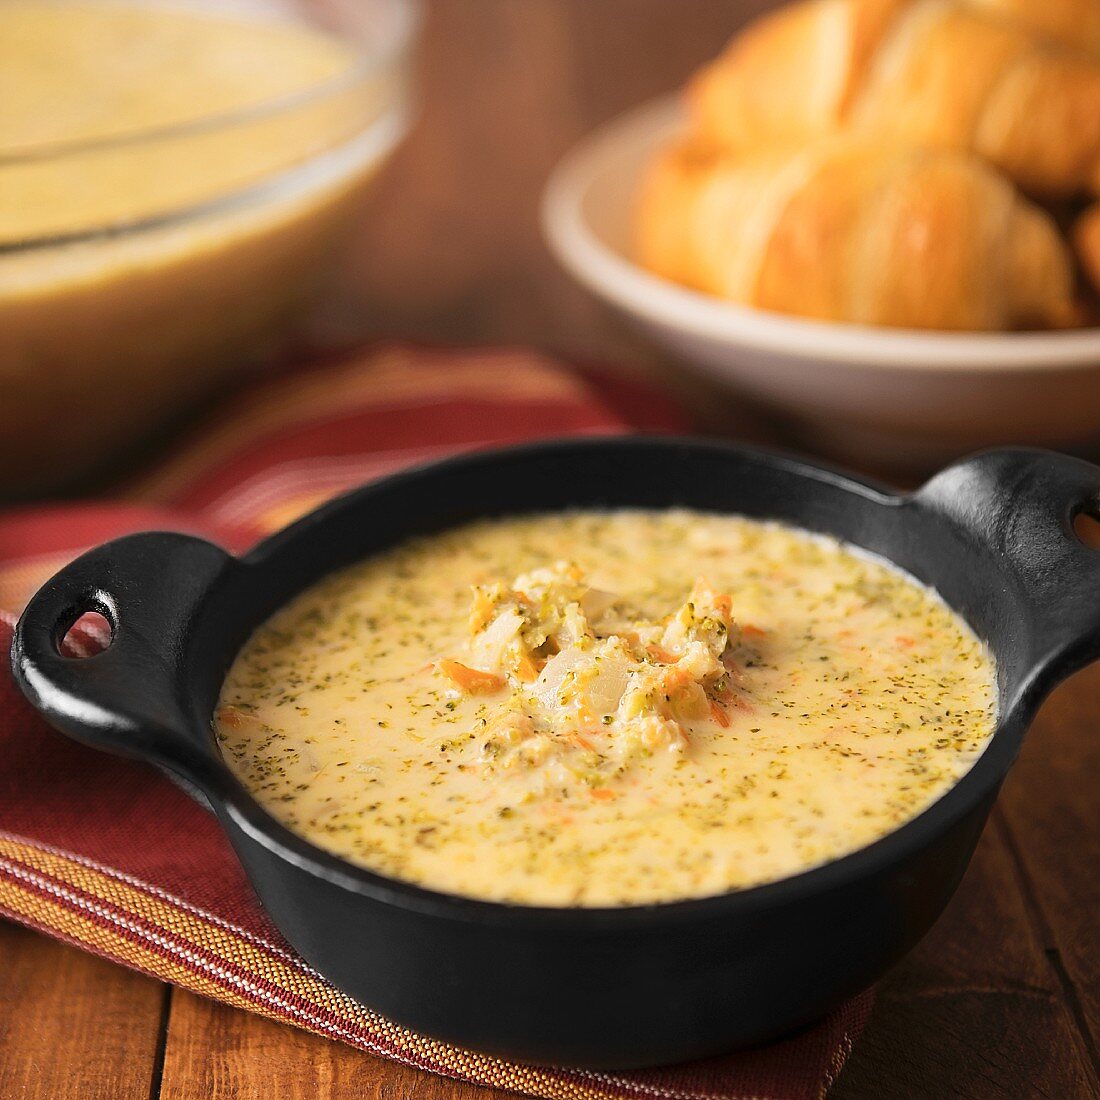 Broccoli and cheese soup with cheddar